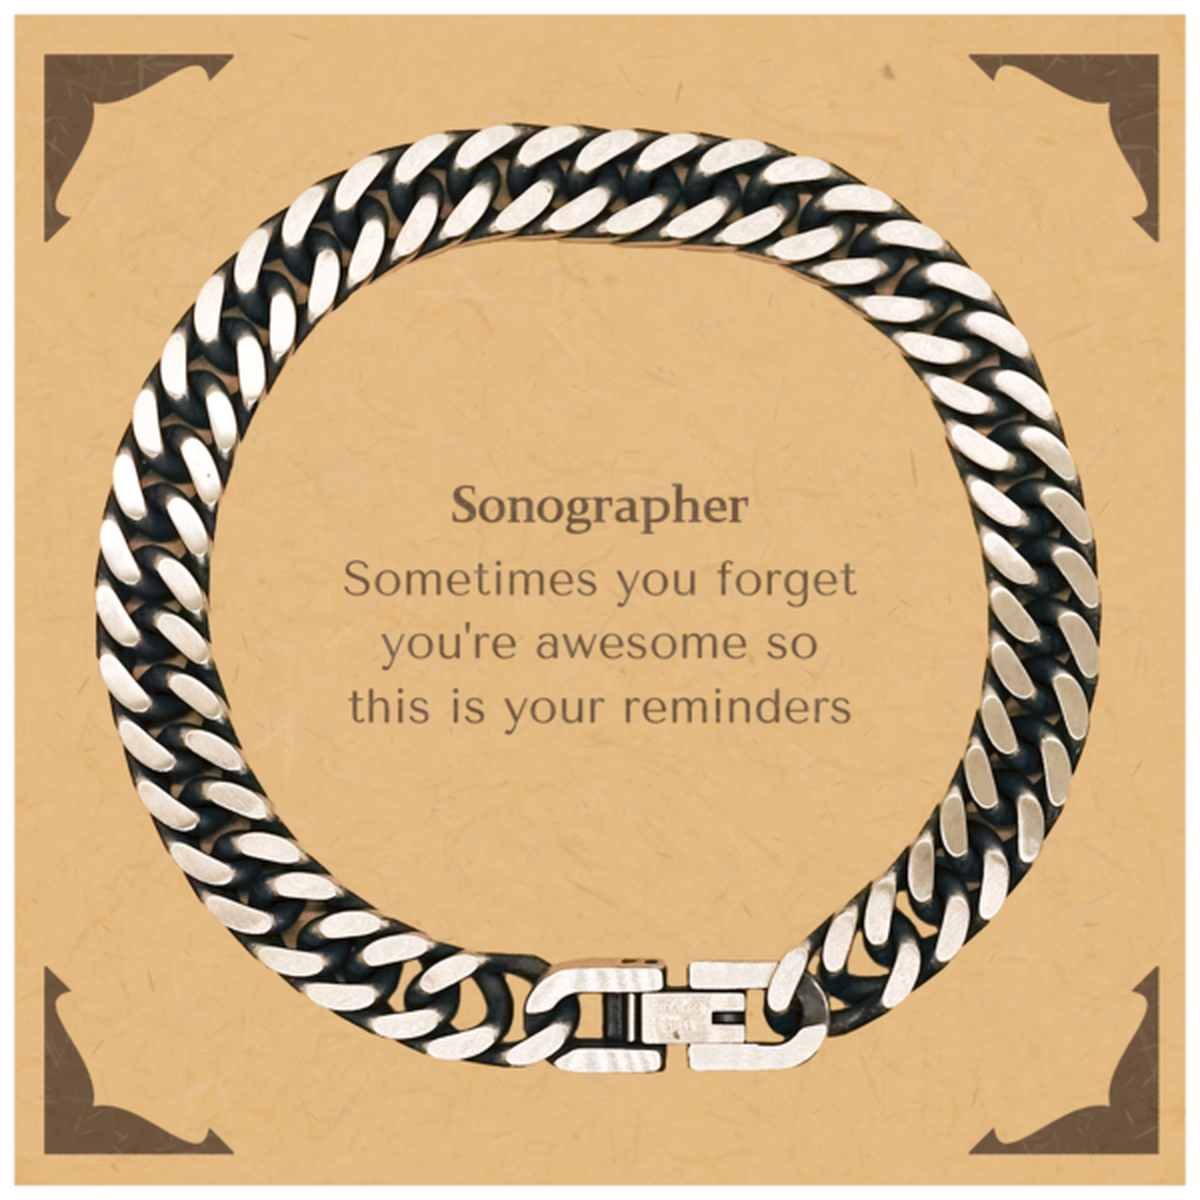 Sentimental Sonographer Cuban Link Chain Bracelet, Sonographer Sometimes you forget you're awesome so this is your reminders, Graduation Christmas Birthday Gifts for Sonographer, Men, Women, Coworkers